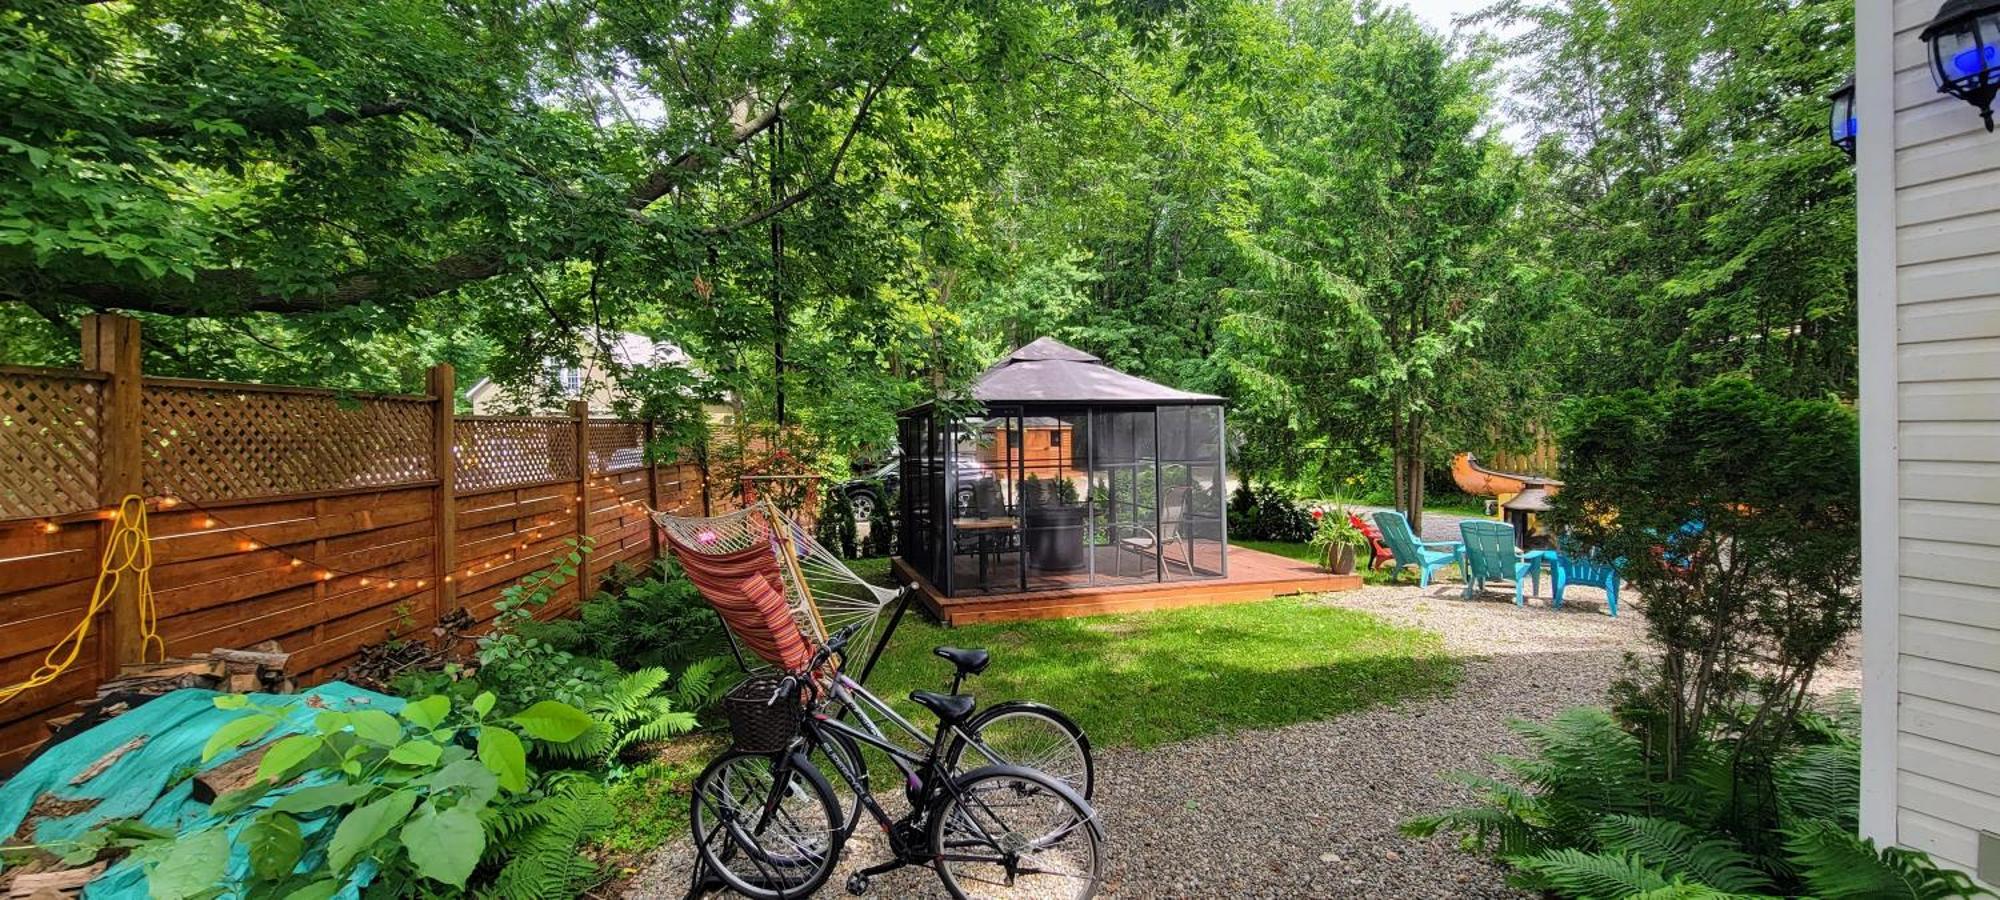 Kokomo Inn Bed And Breakfast Ottawa-Gatineau'S Only Tropical Riverfront B&B On The National Capital Cycling Pathway Route Verte #1 - For Adults Only - Chambre D'Hotes Tropical Aux Berges Des Outaouais Bnb #17542O Exterior photo